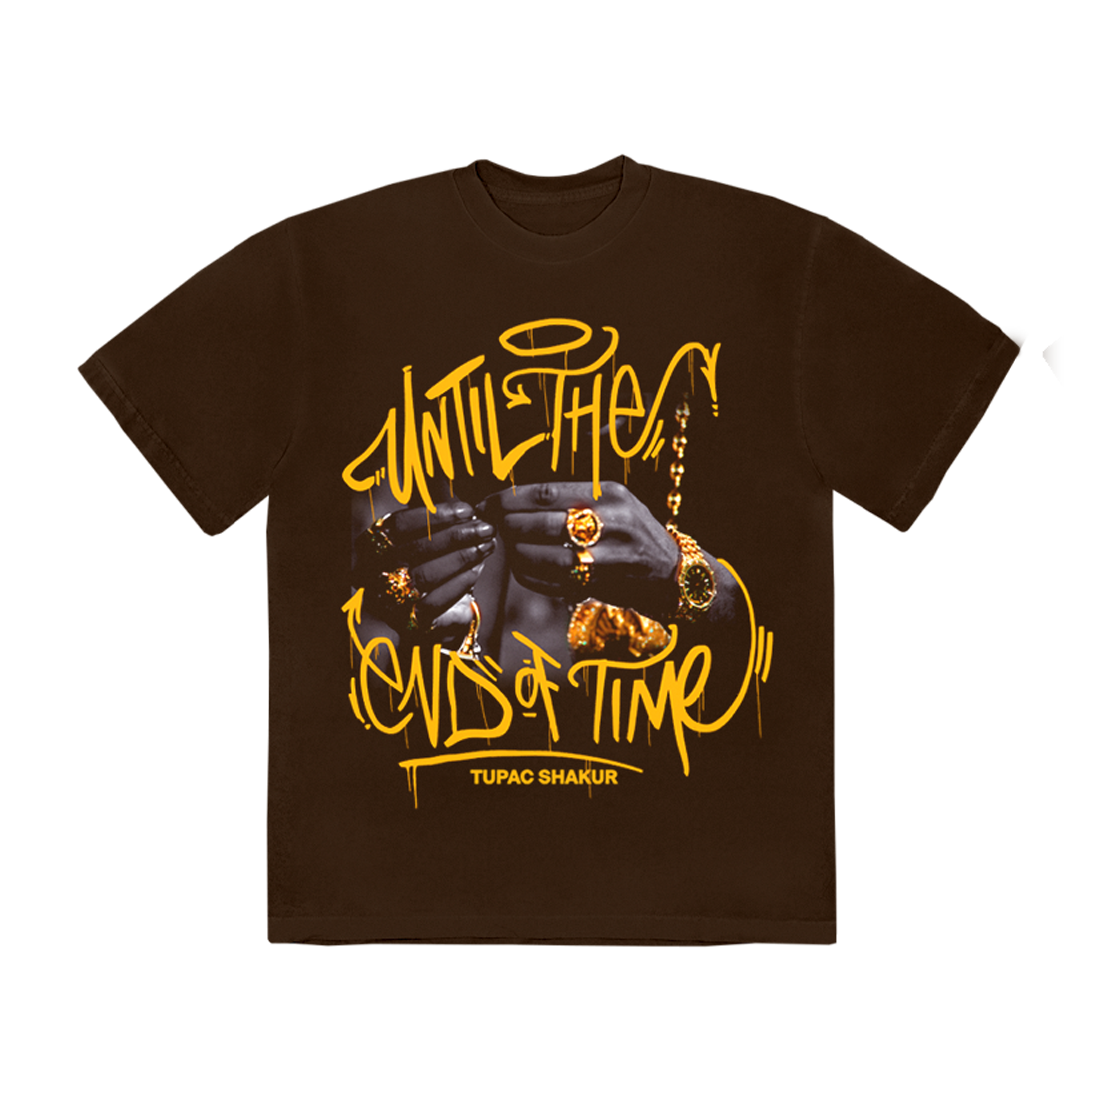 2Pac - Until The End: T-Shirt